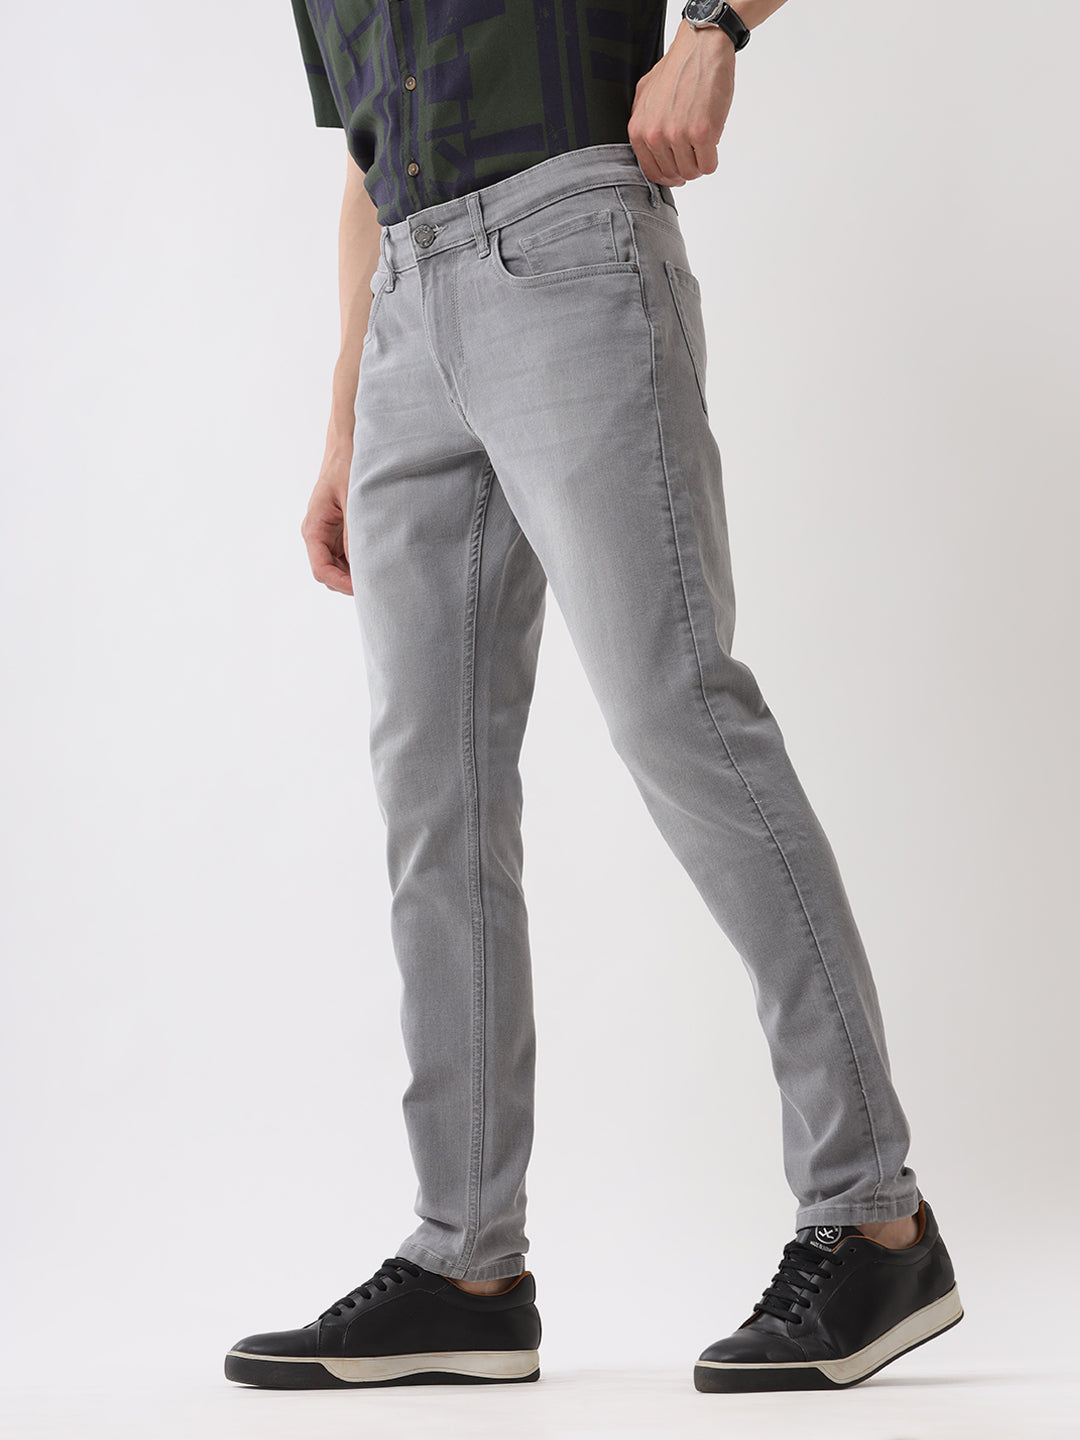 Grey Fade Slim Tapered Jeans